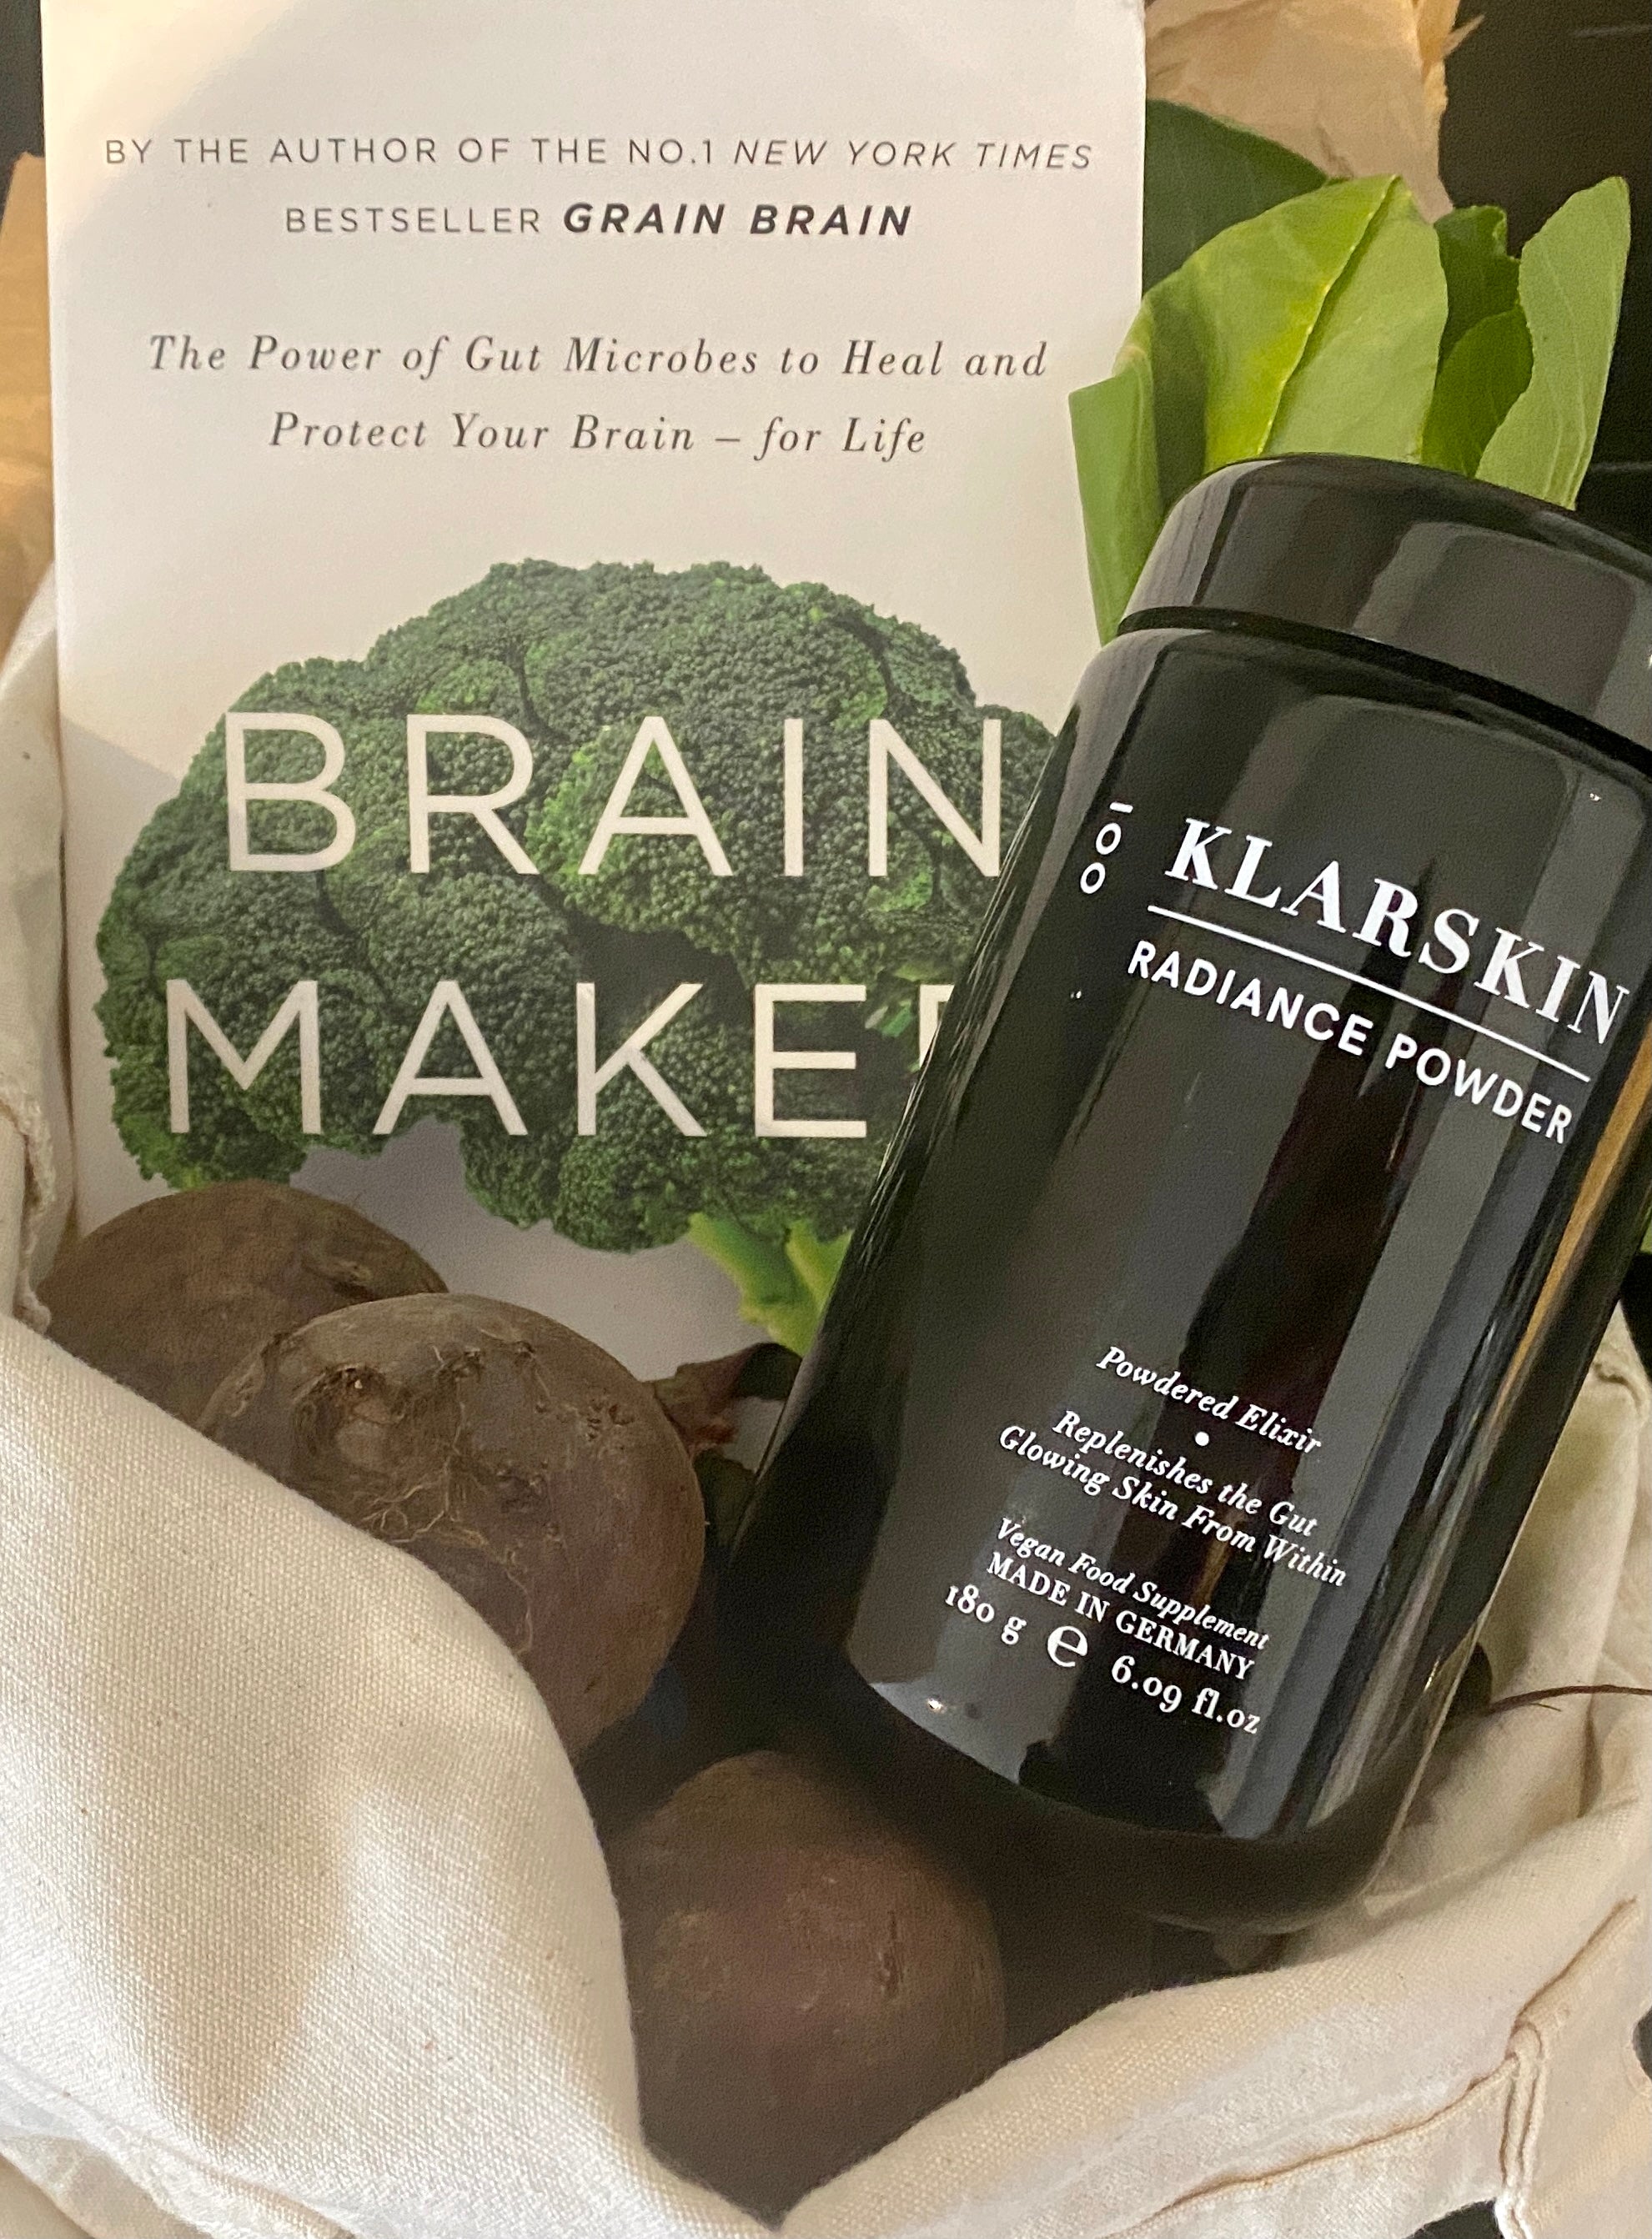 Book Review: BRAIN MAKER by Dr Perlmutter